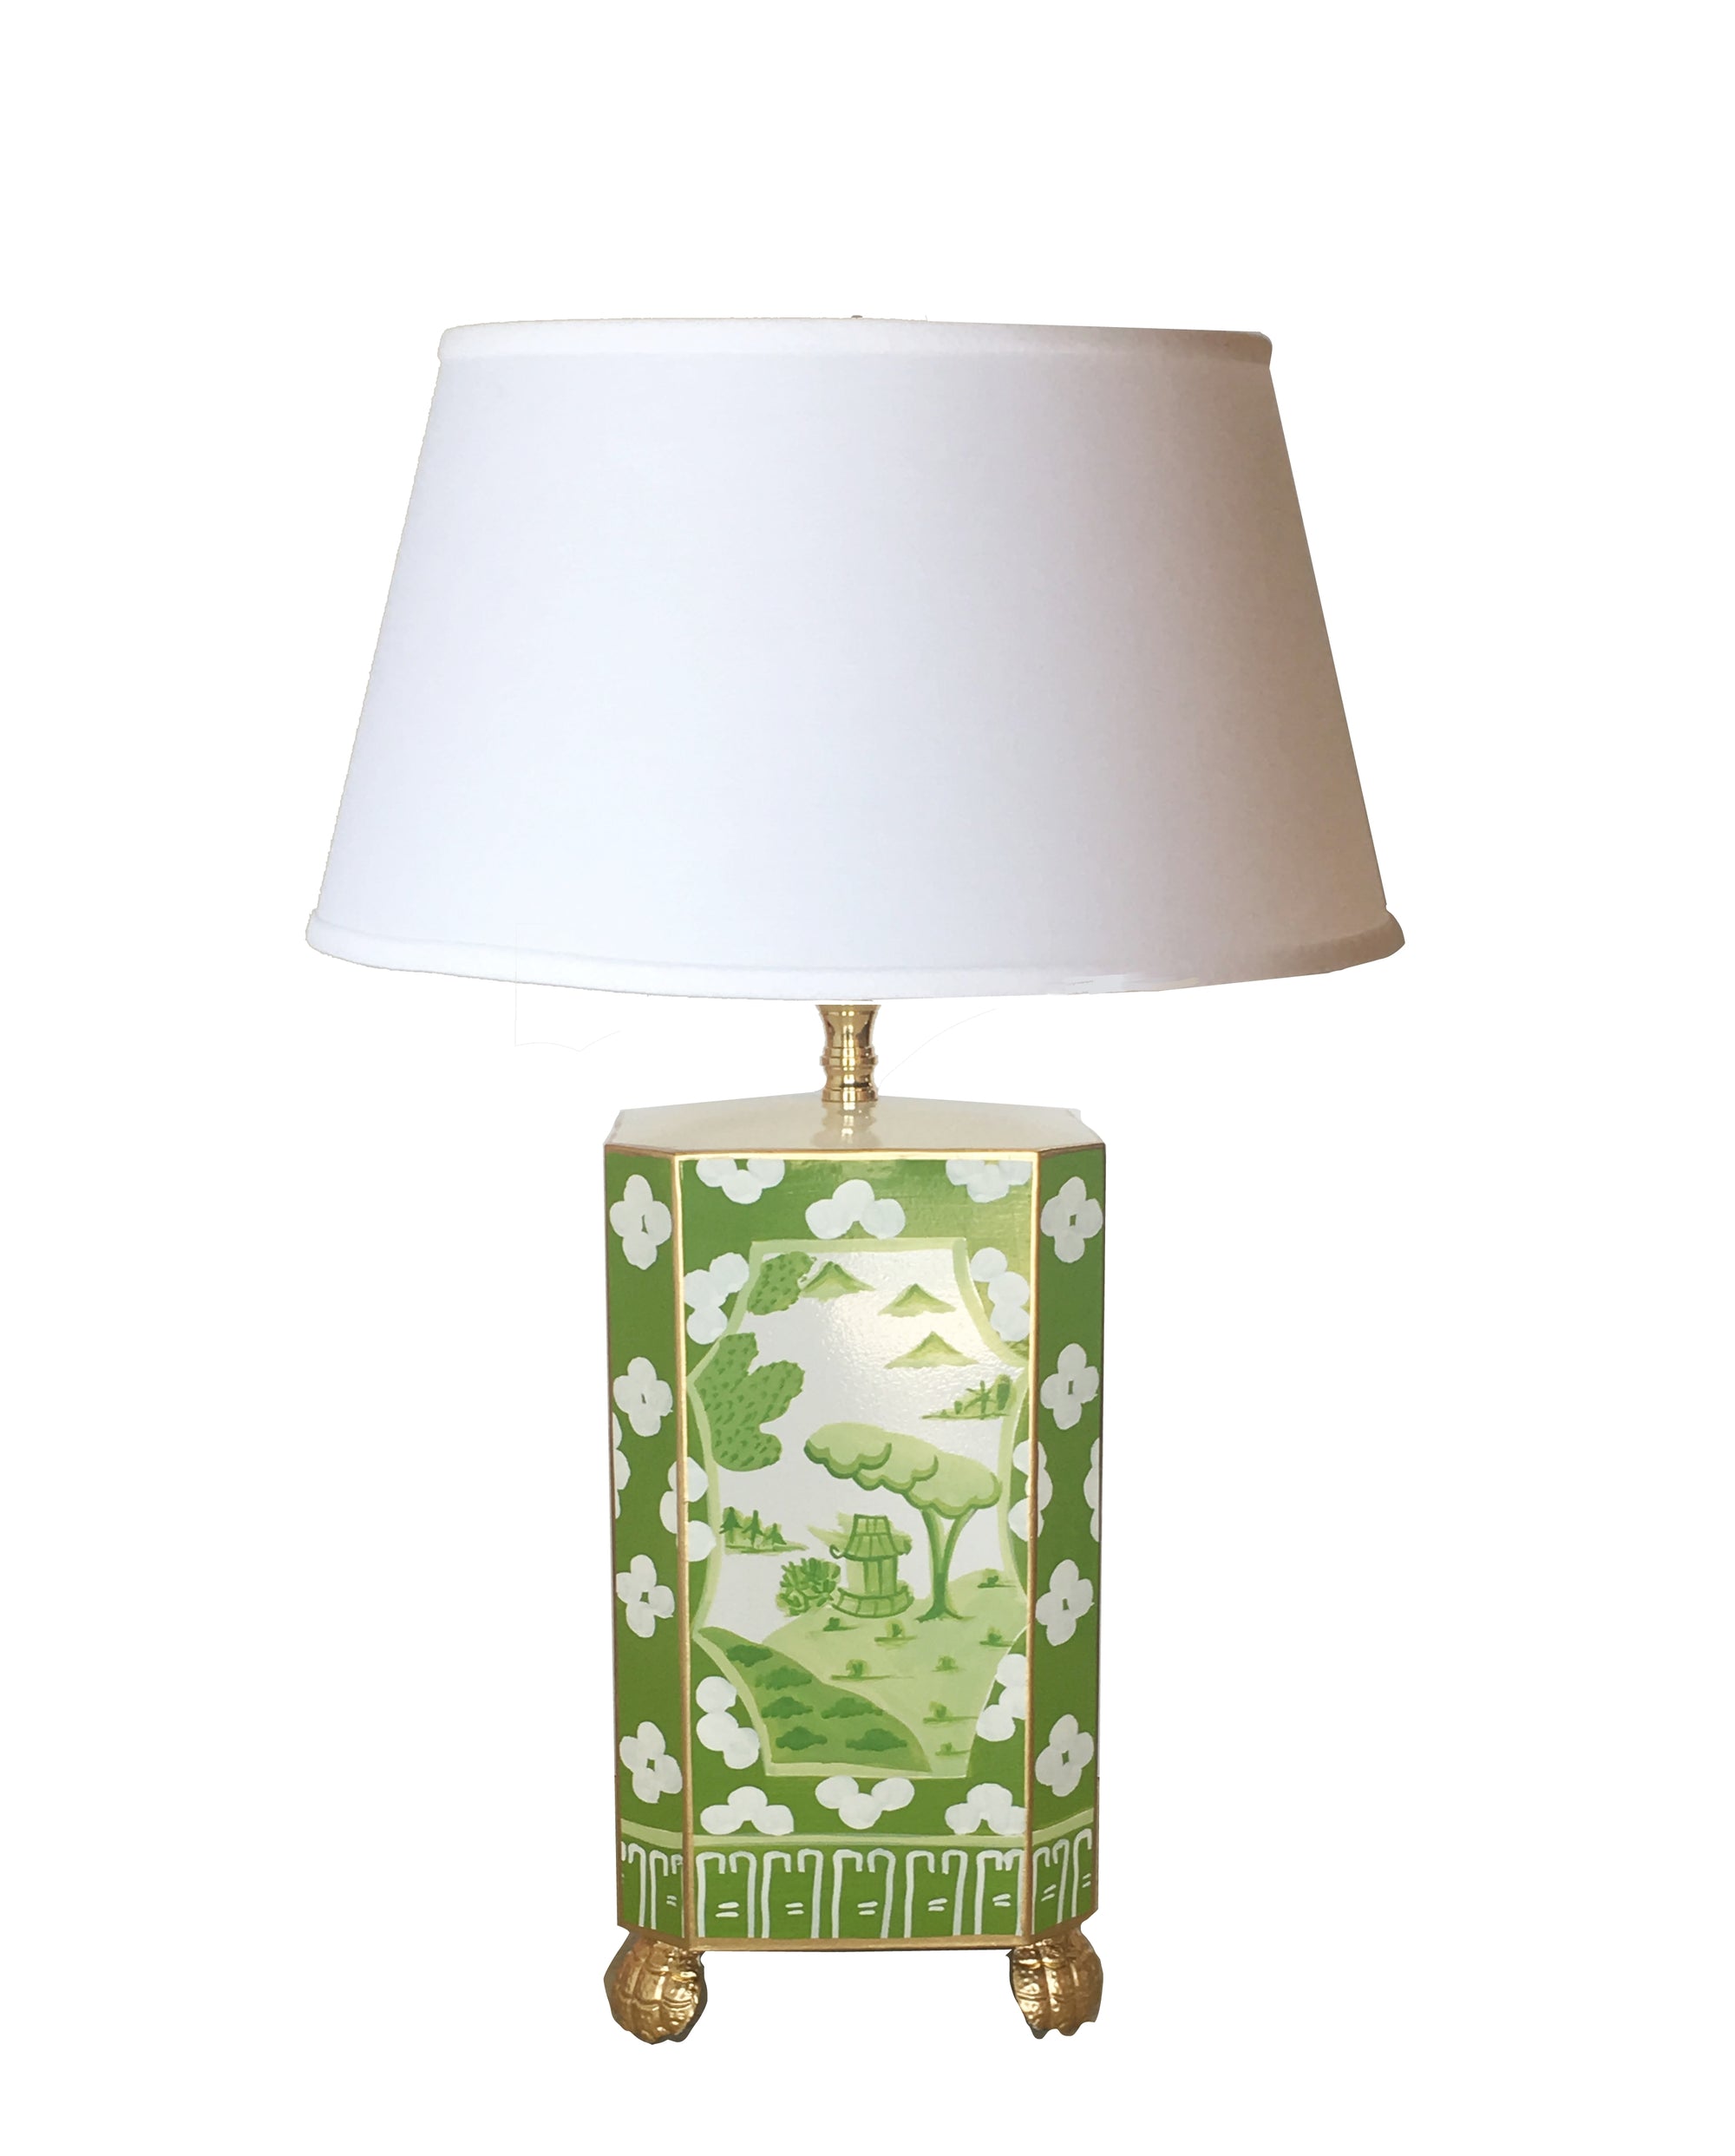 Dana Gibson Canton in Green Lamp with White Shade